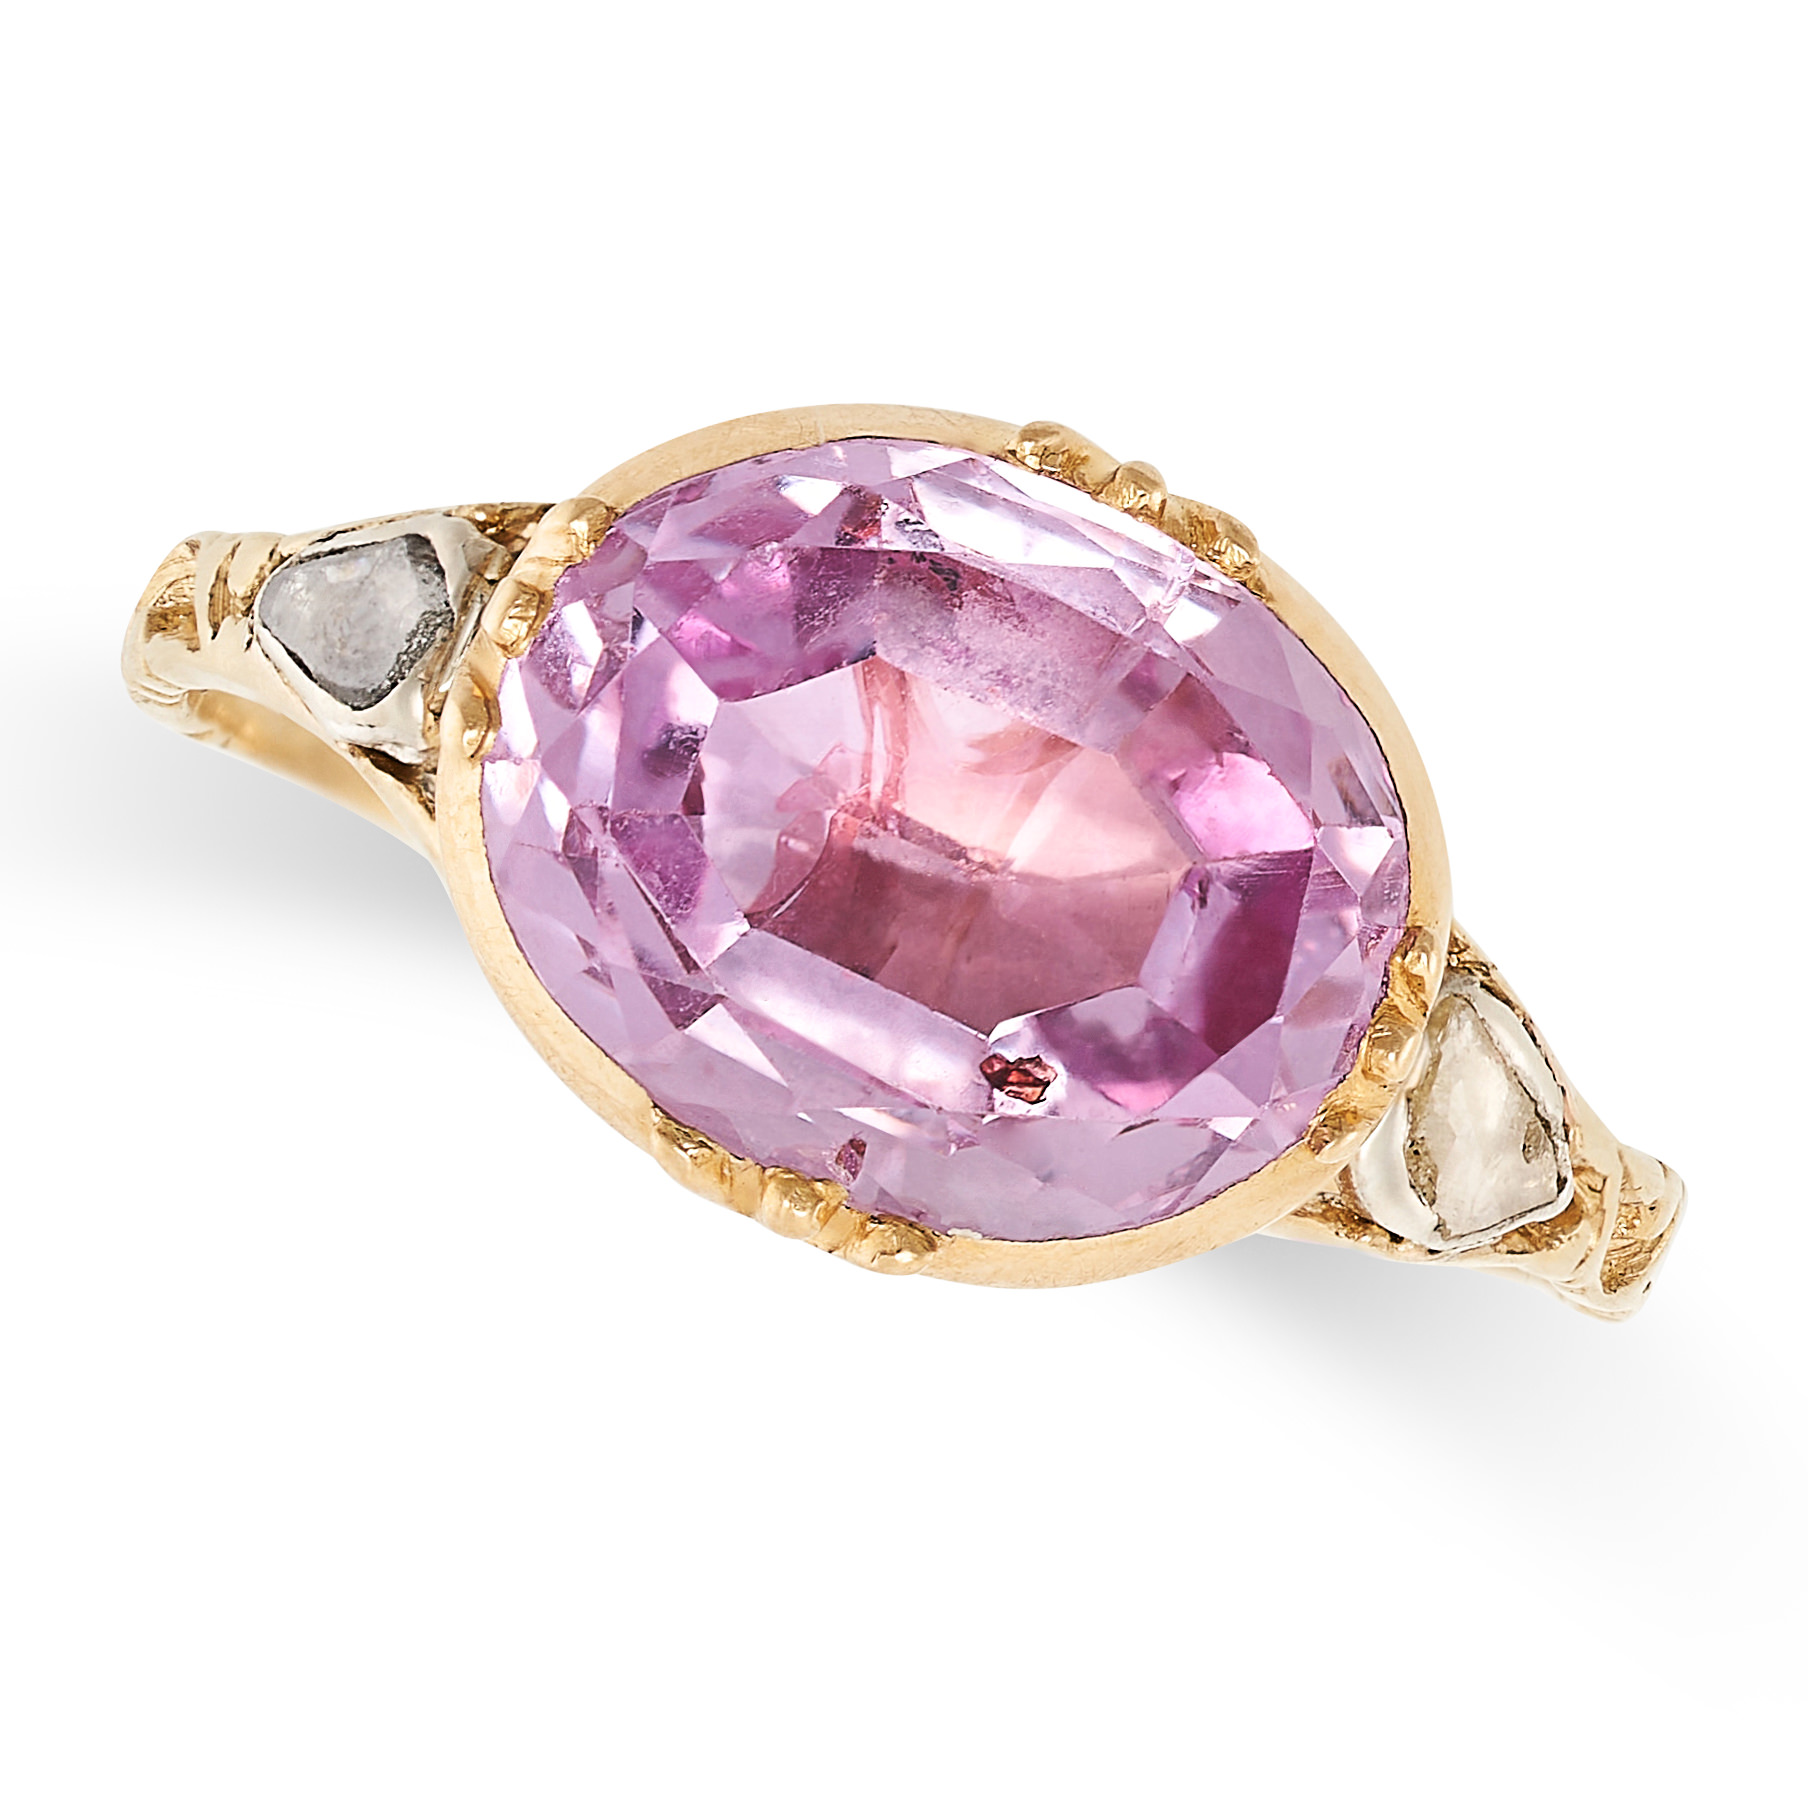 A PINK TOPAZ AND DIAMOND DRESS RING, 19TH CENTURY AND LATER in yellow gold and silver, later